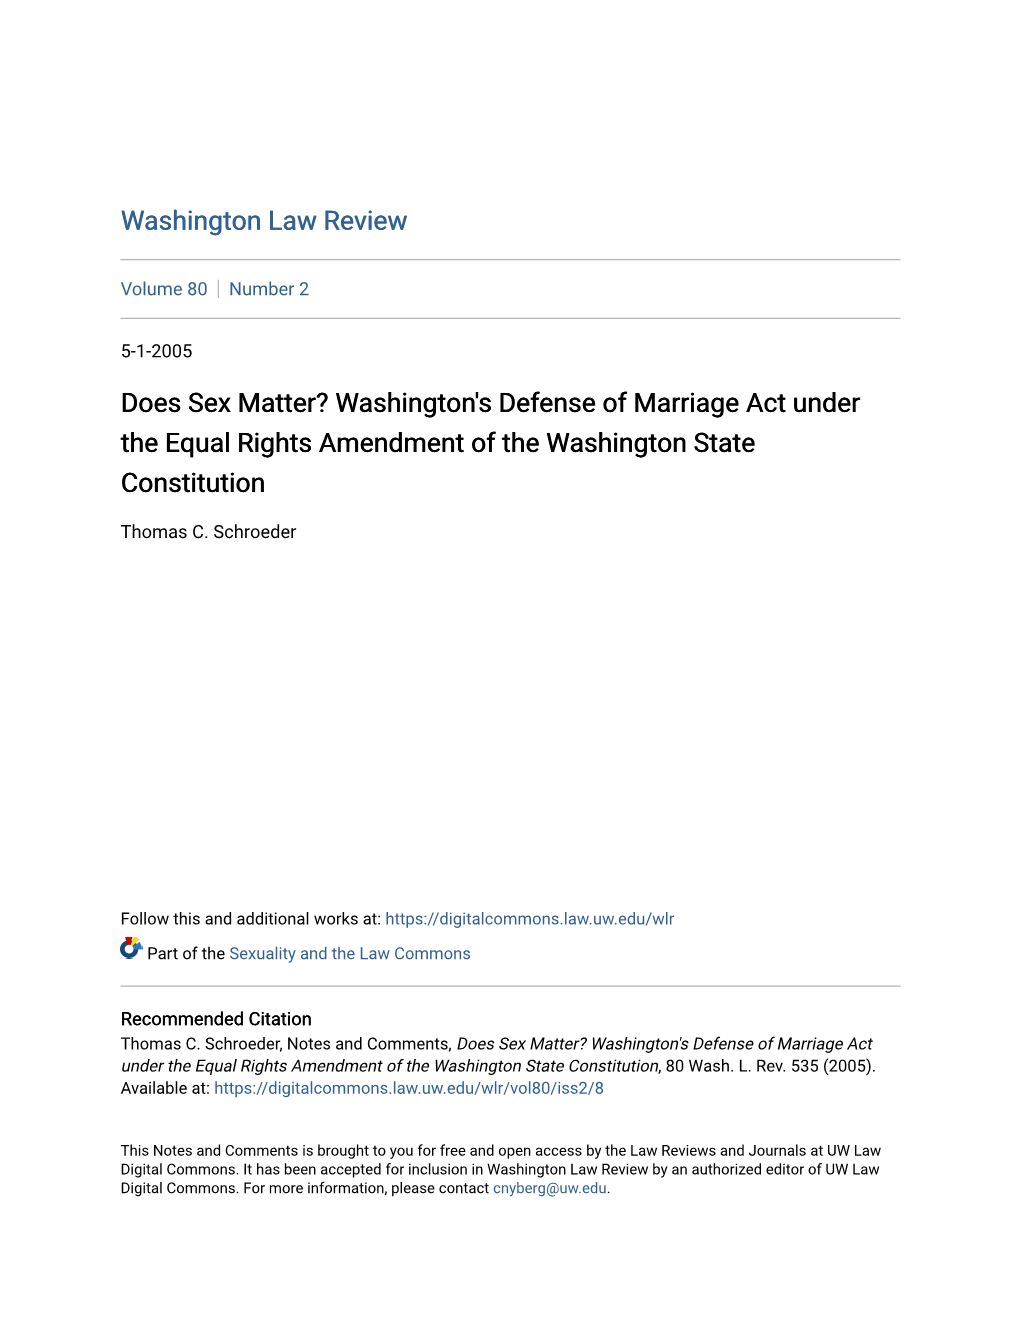 Washington's Defense of Marriage Act Under the Equal Rights Amendment of the Washington State Constitution